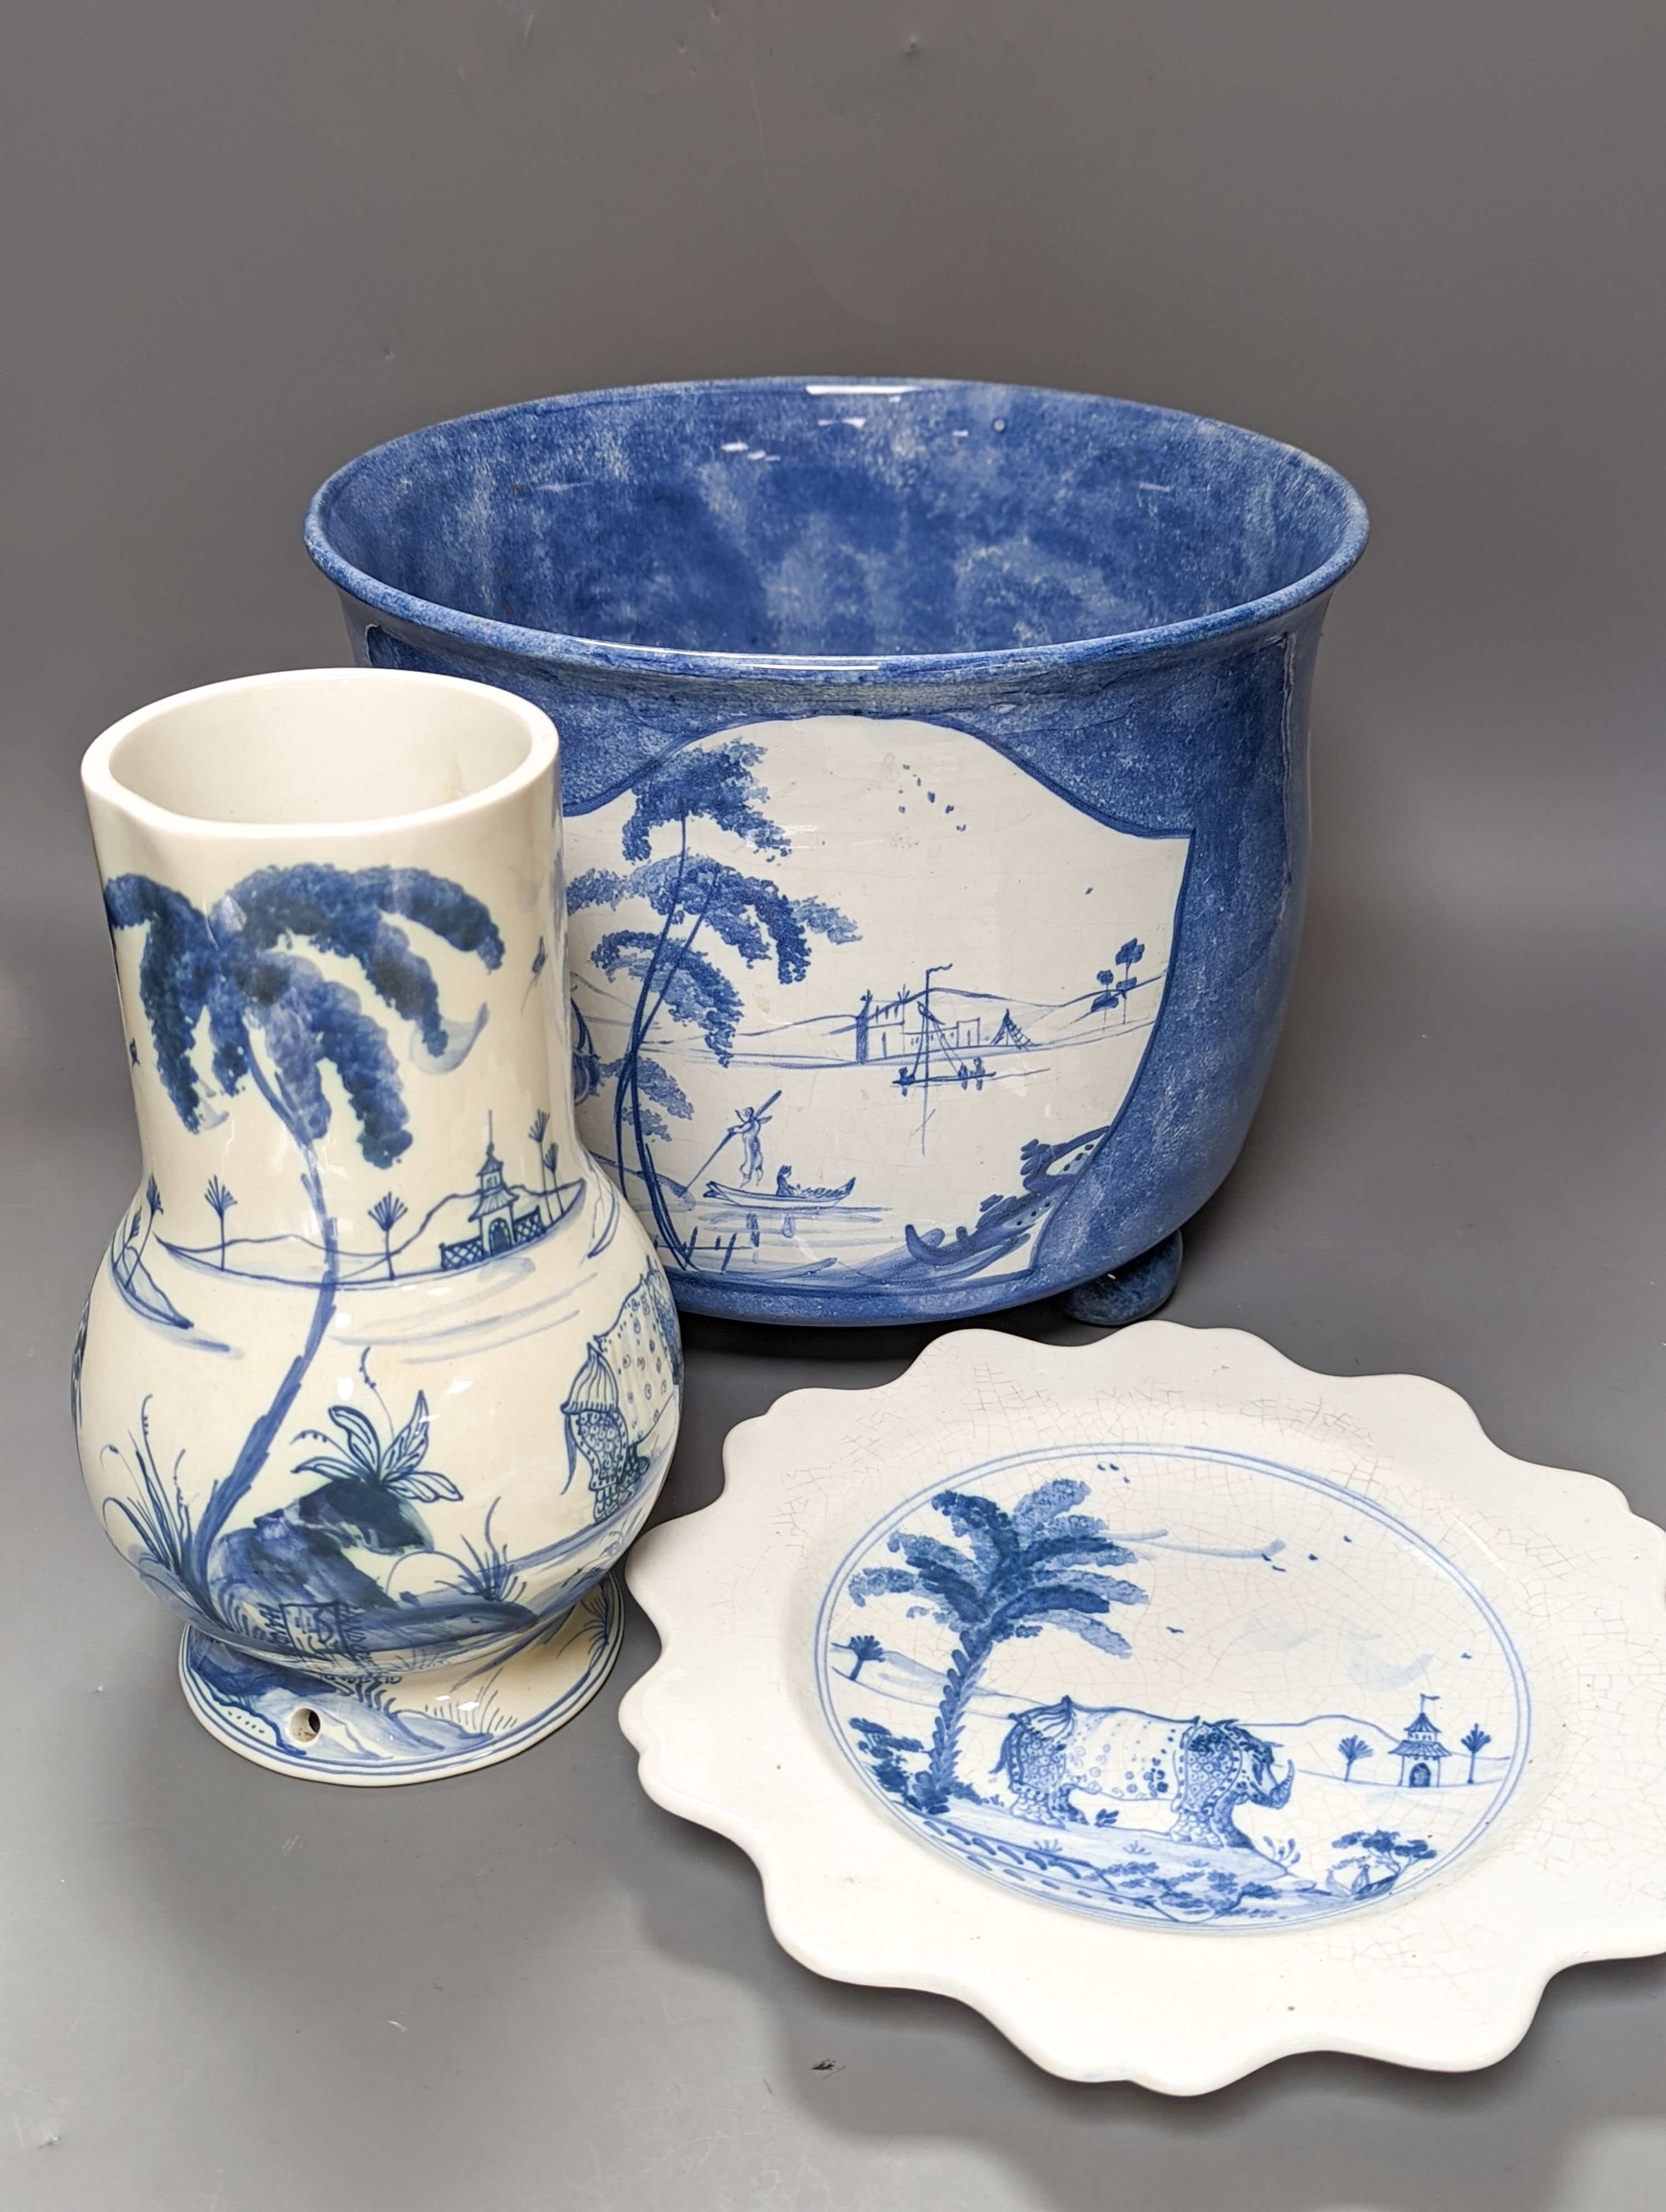 Isis pottery for Colefax and Fowler, a group of blue and white ceramics decorated in imitation of Bristol delftwares